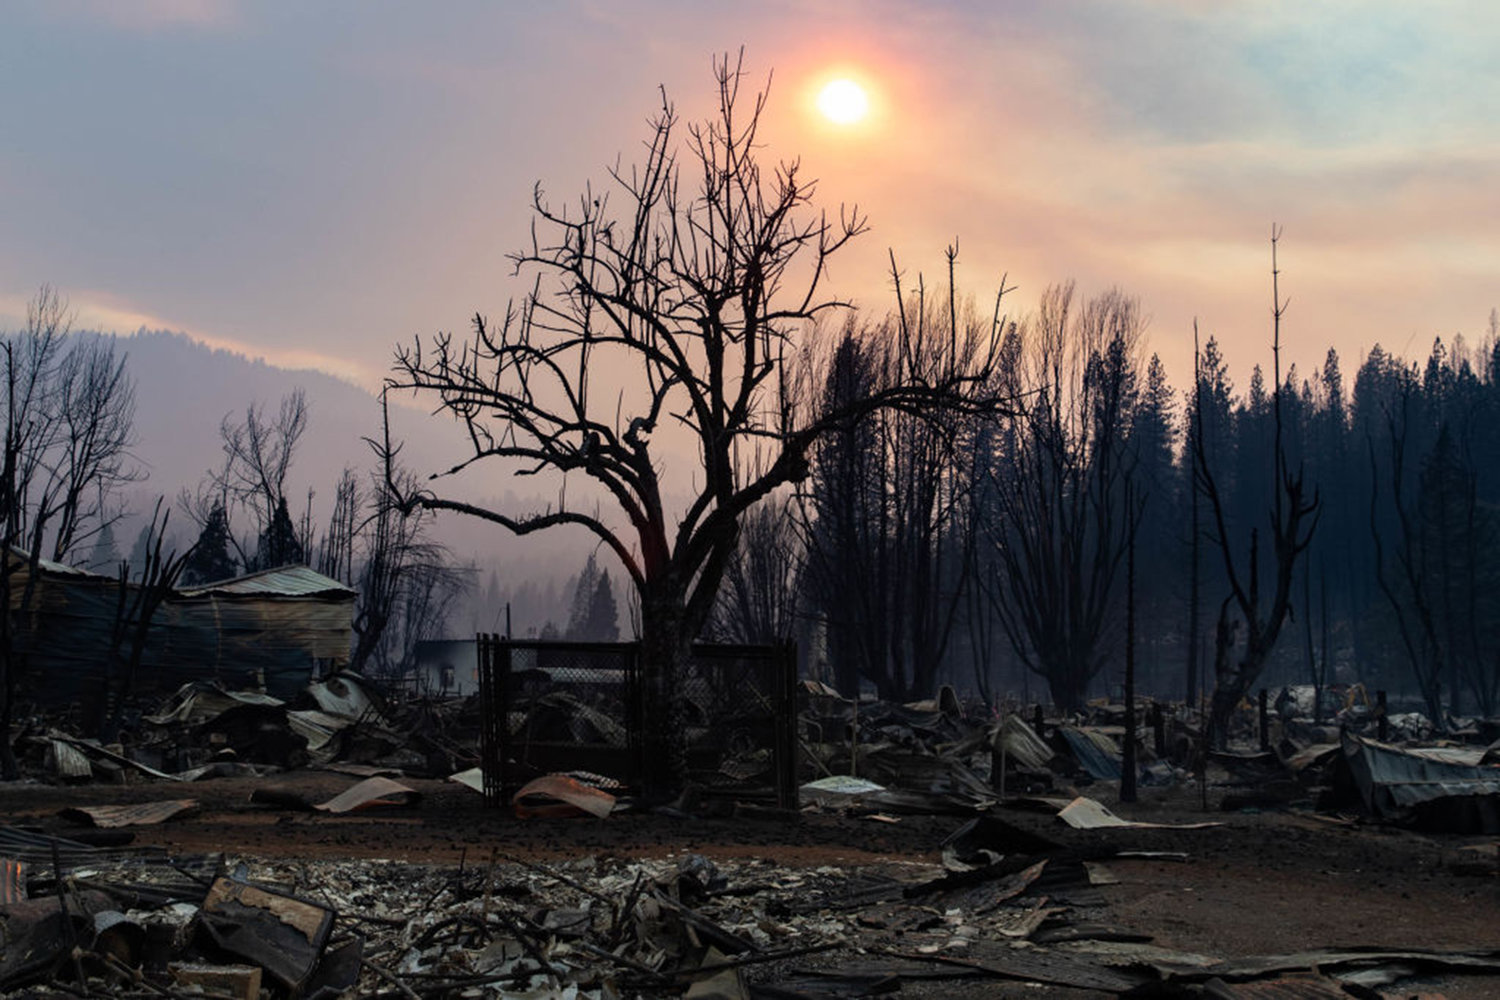 The sun sets on the remains of the town of Greenville on August 8, 2021 in Greenville, California. The Dixie Fire, which has incinerated more than 463,000 acres, is the second largest recorded wildfire in state history and remains only 21 percent contained. (Maranie R. Staab/Getty Images/TNS)